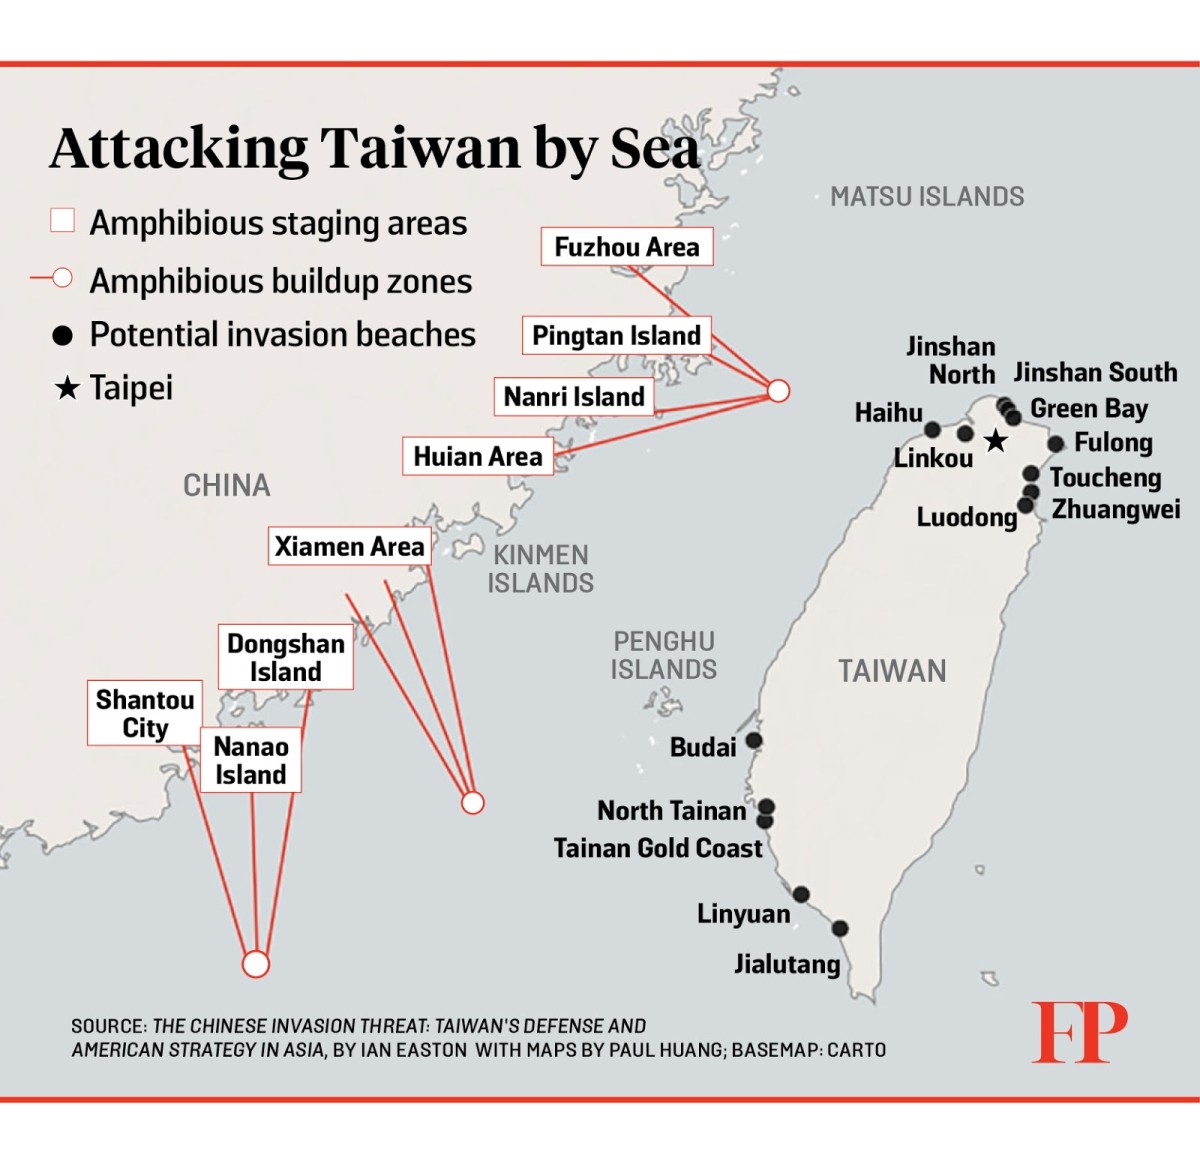 will-china-attack-taiwanis-there-a-justification-for-it